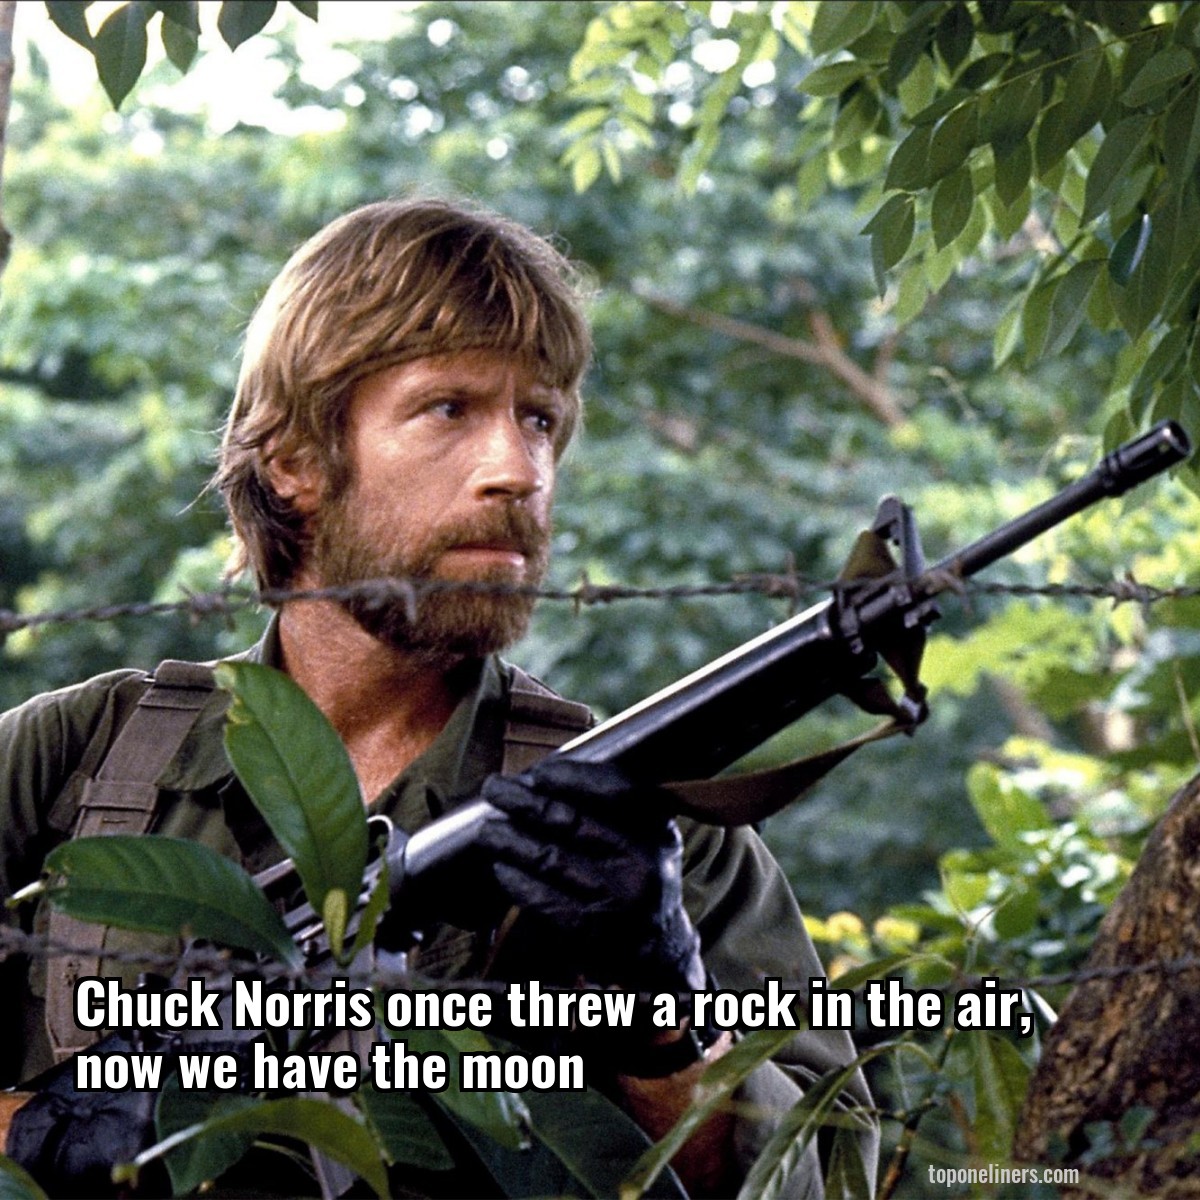 Chuck Norris once threw a rock in the air, now we have the moon